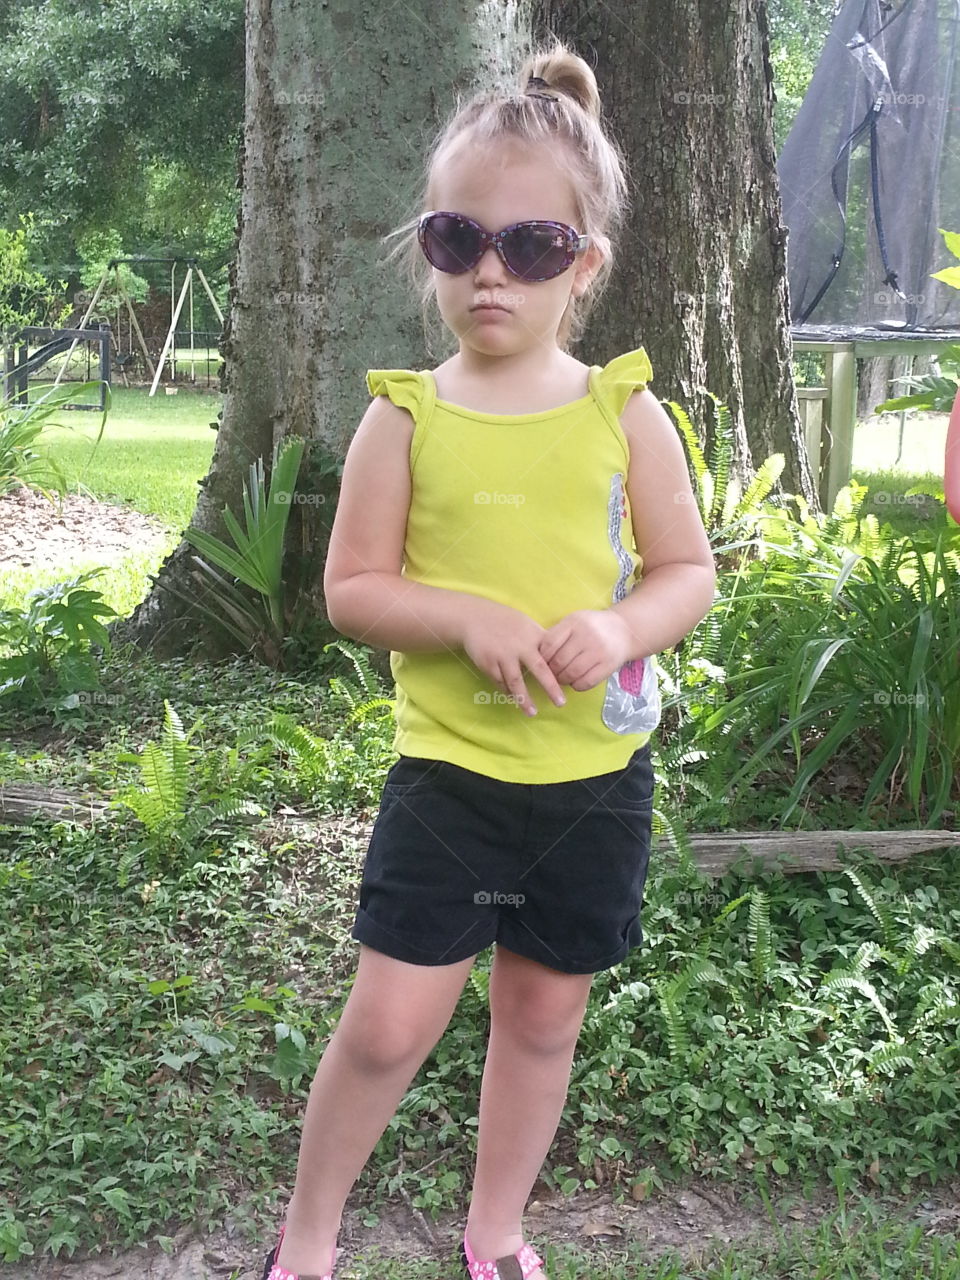 Prissy. My granddaughter was all ready for a fun day at the park!